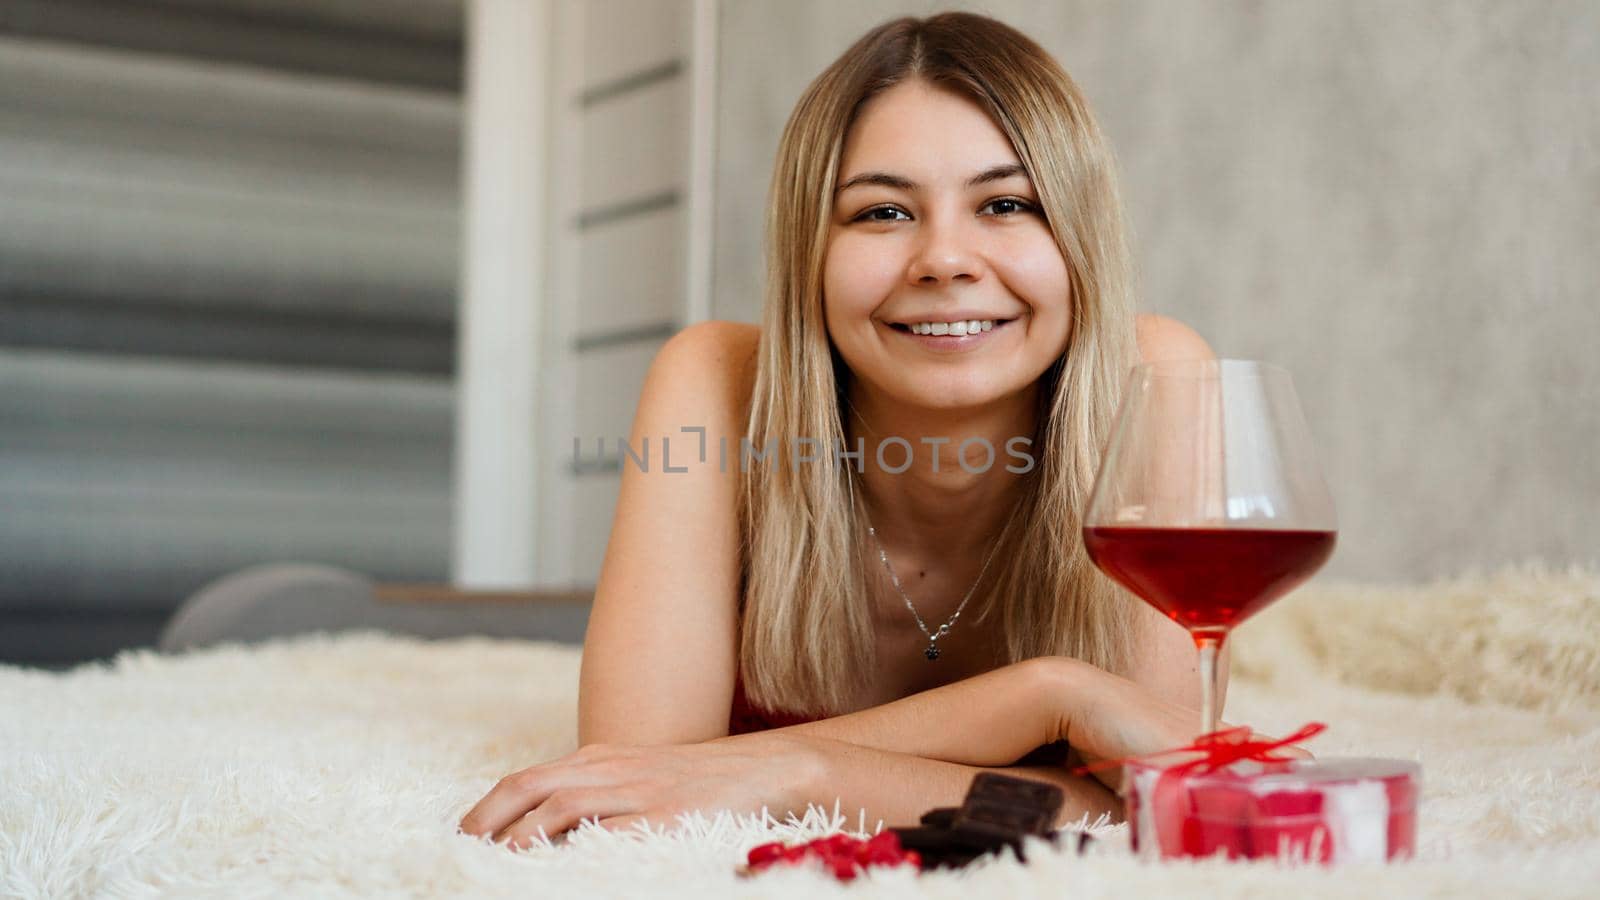 A beautiful smiling blonde lies in bed. Valentines Day Morning. A glass of wine, chocolate, sweets and a gift next to the girl. Happy morning in love